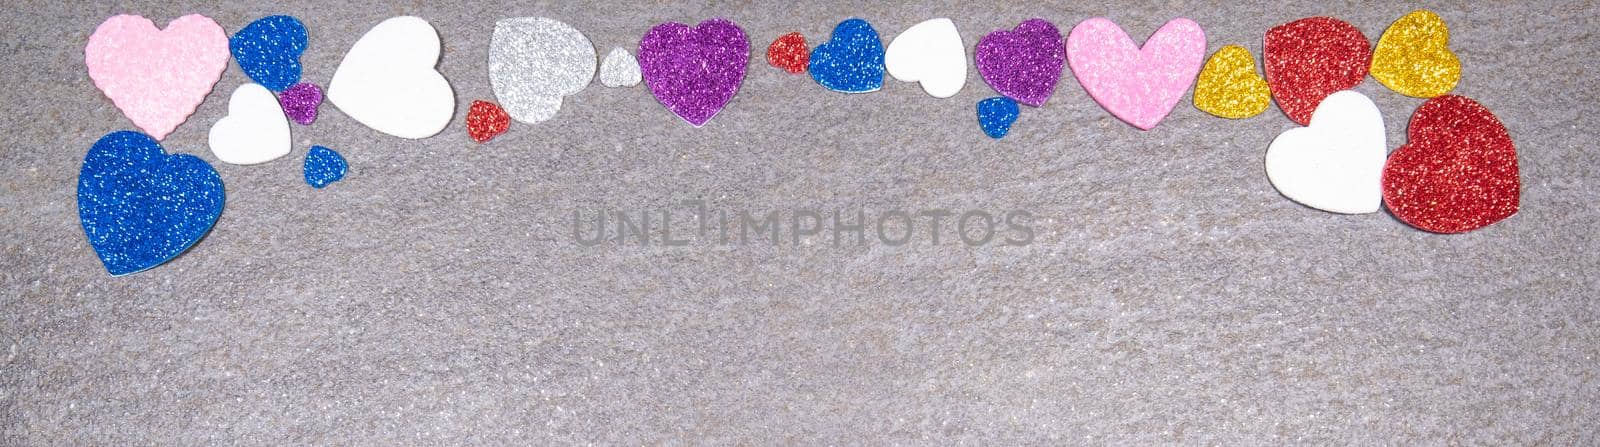 colorful hearts of glitter of all colors on a gray granite background. Concept of valentines day and love in general by jp_chretien